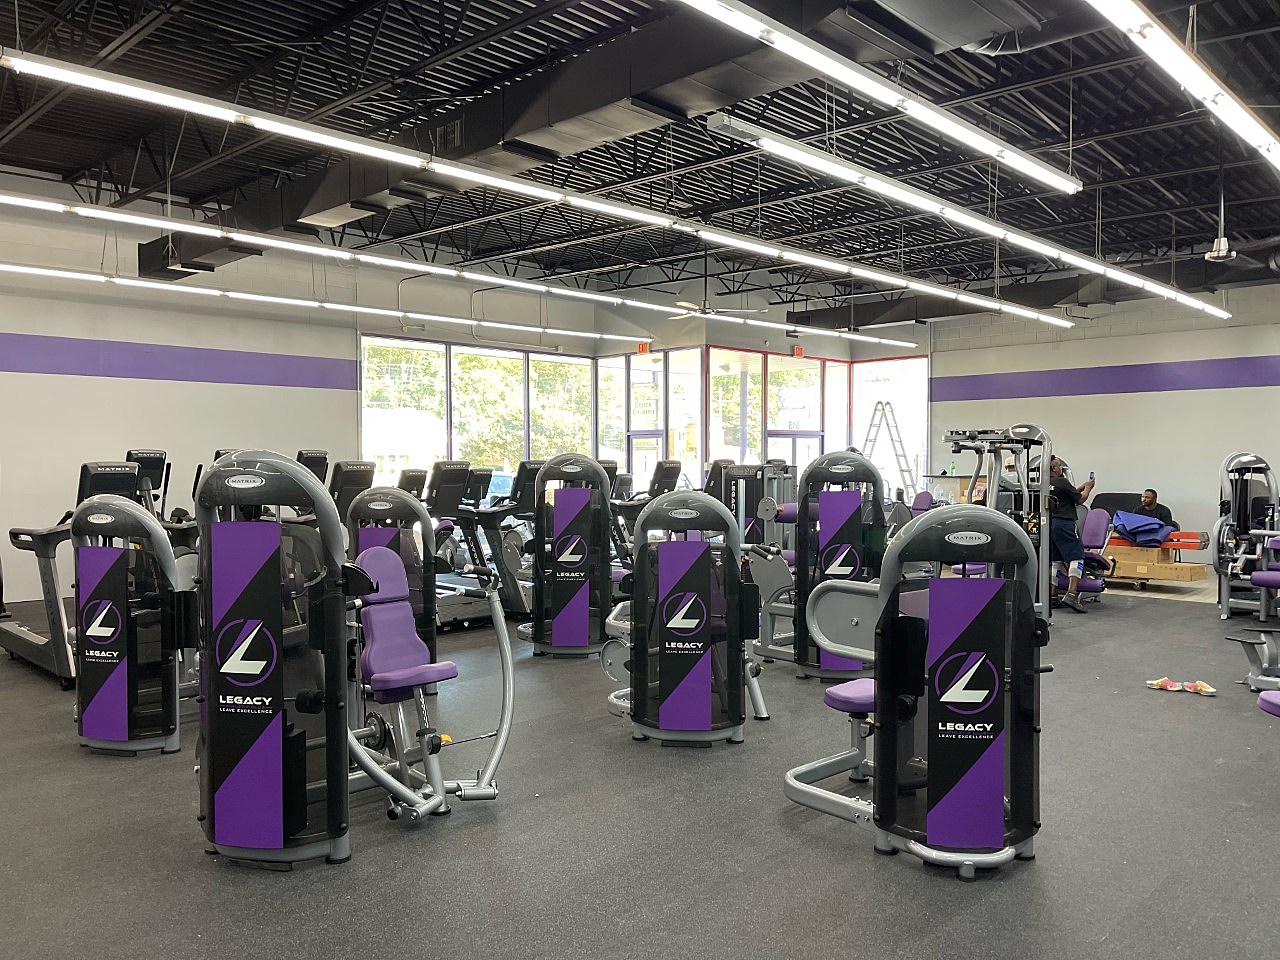 Legacy Fitness In Nacogdoches, Texas Closes Temporarily